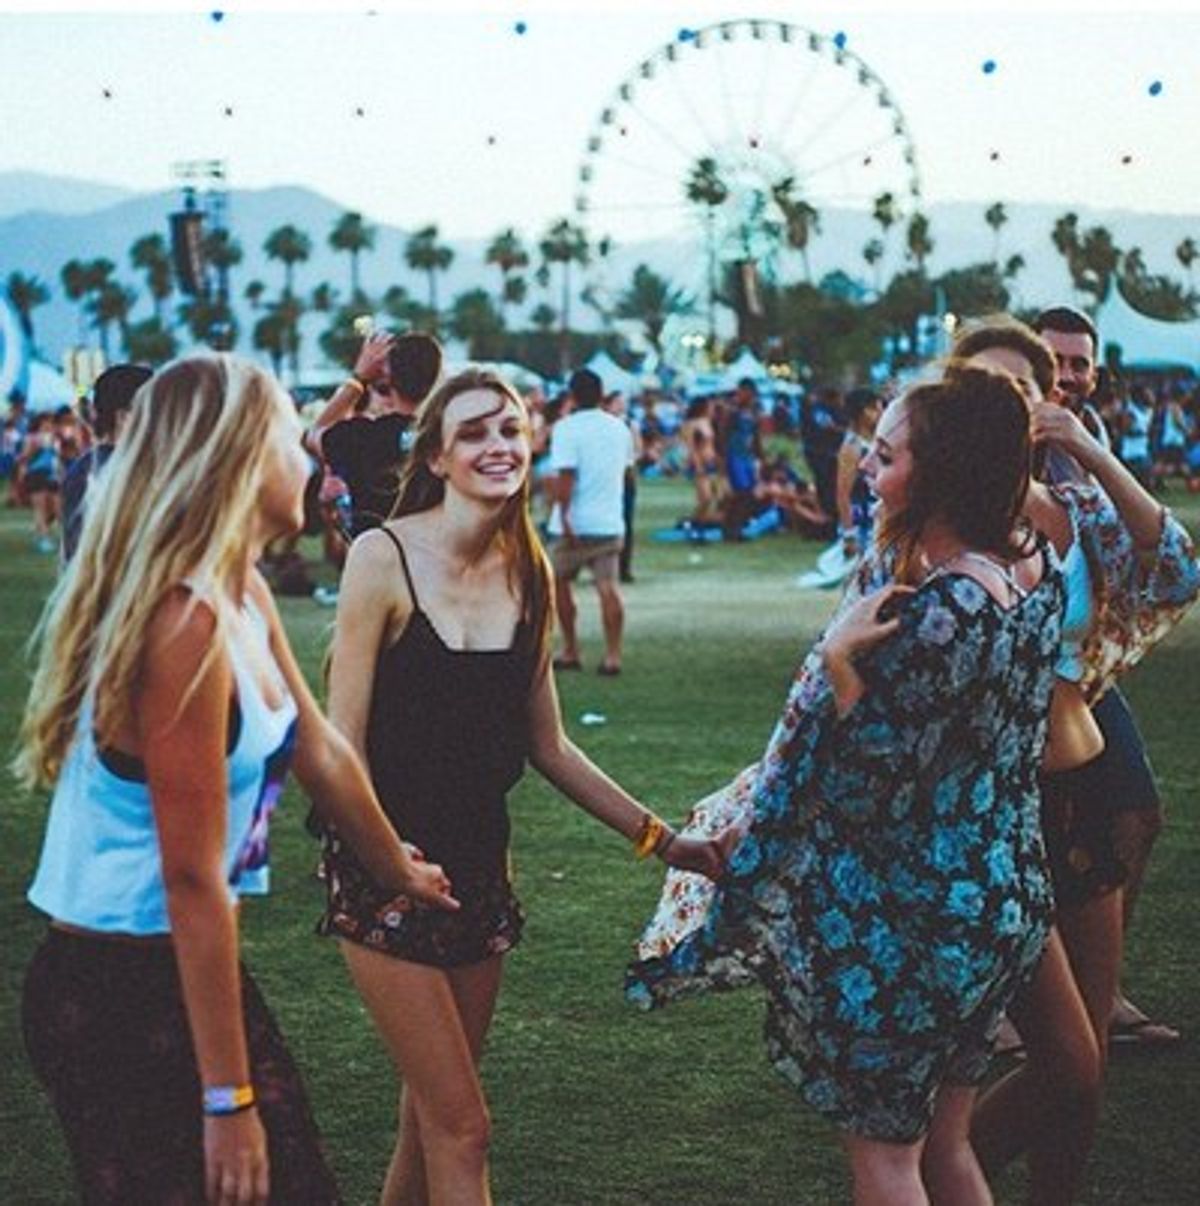 What Not to Do at Music Festivals